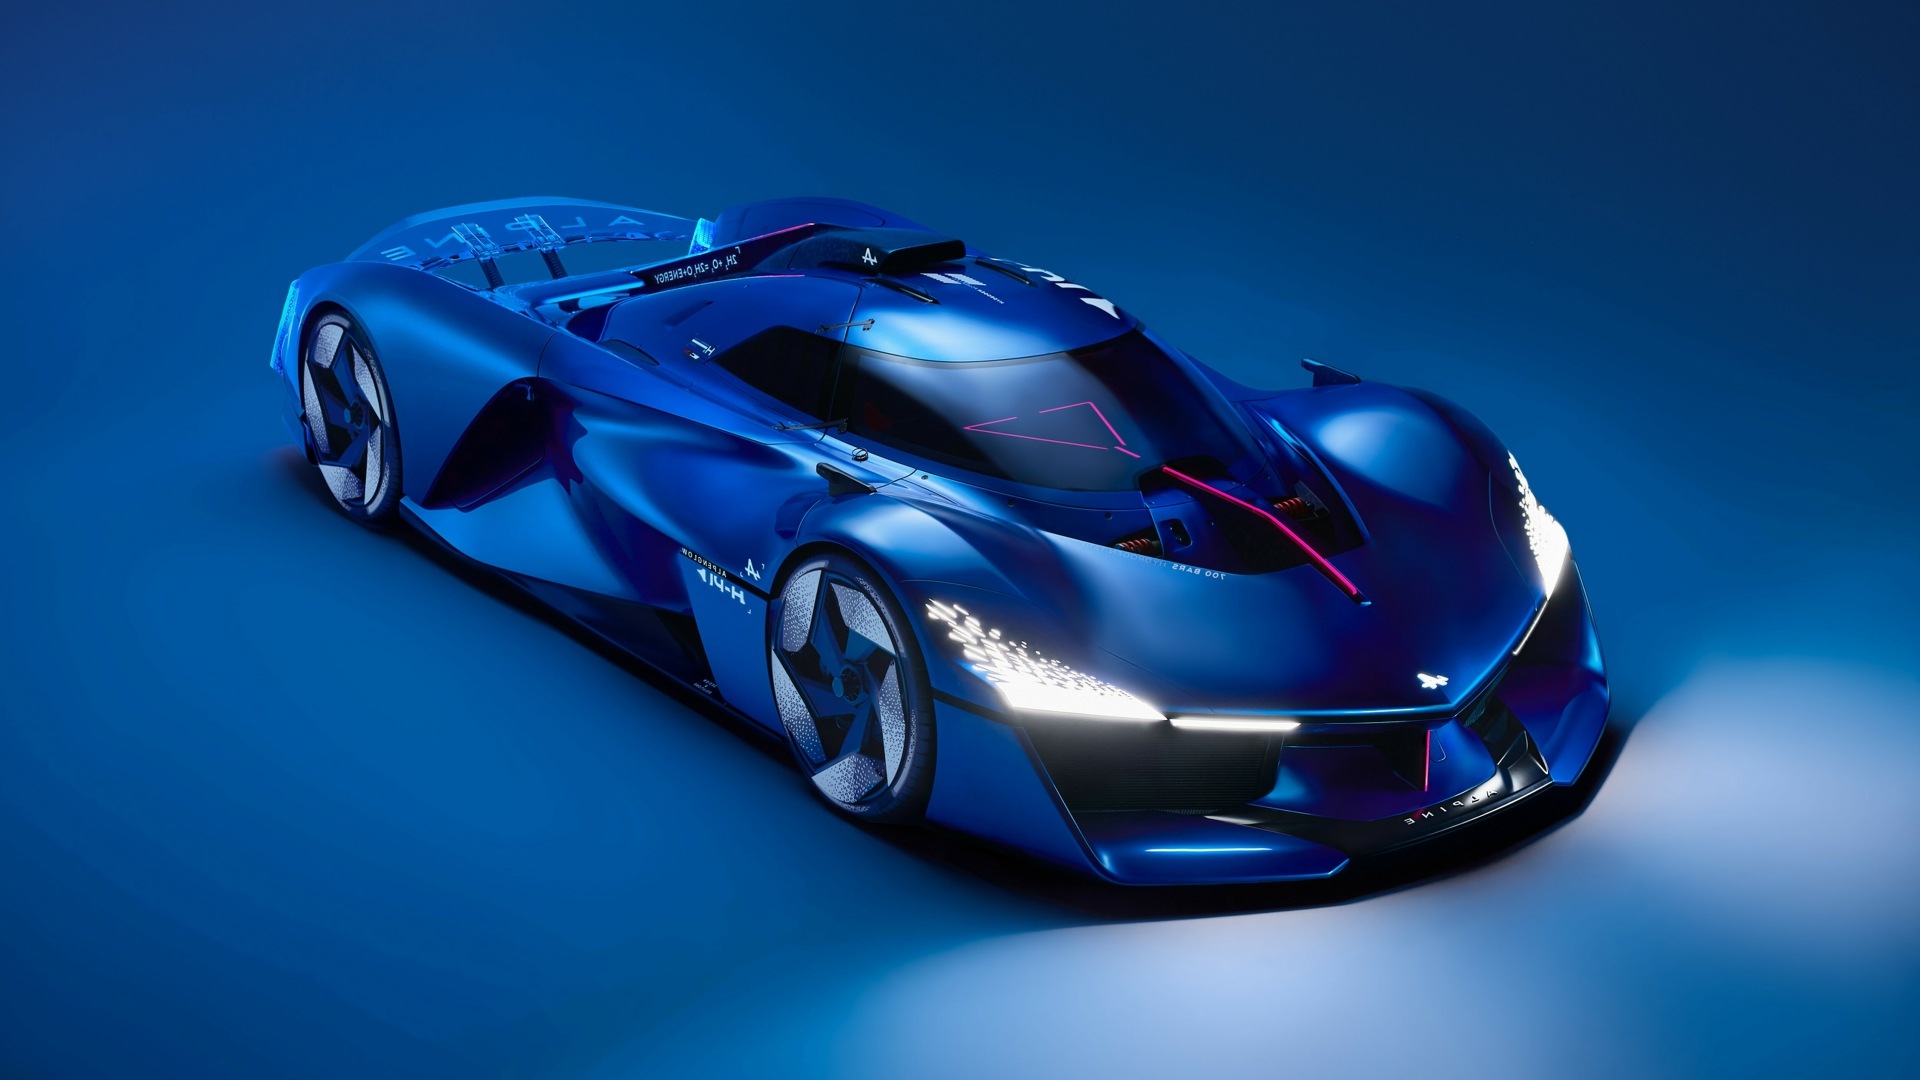 The Hydrogen Powered Supercar - Alpine Alpenglow Hy4